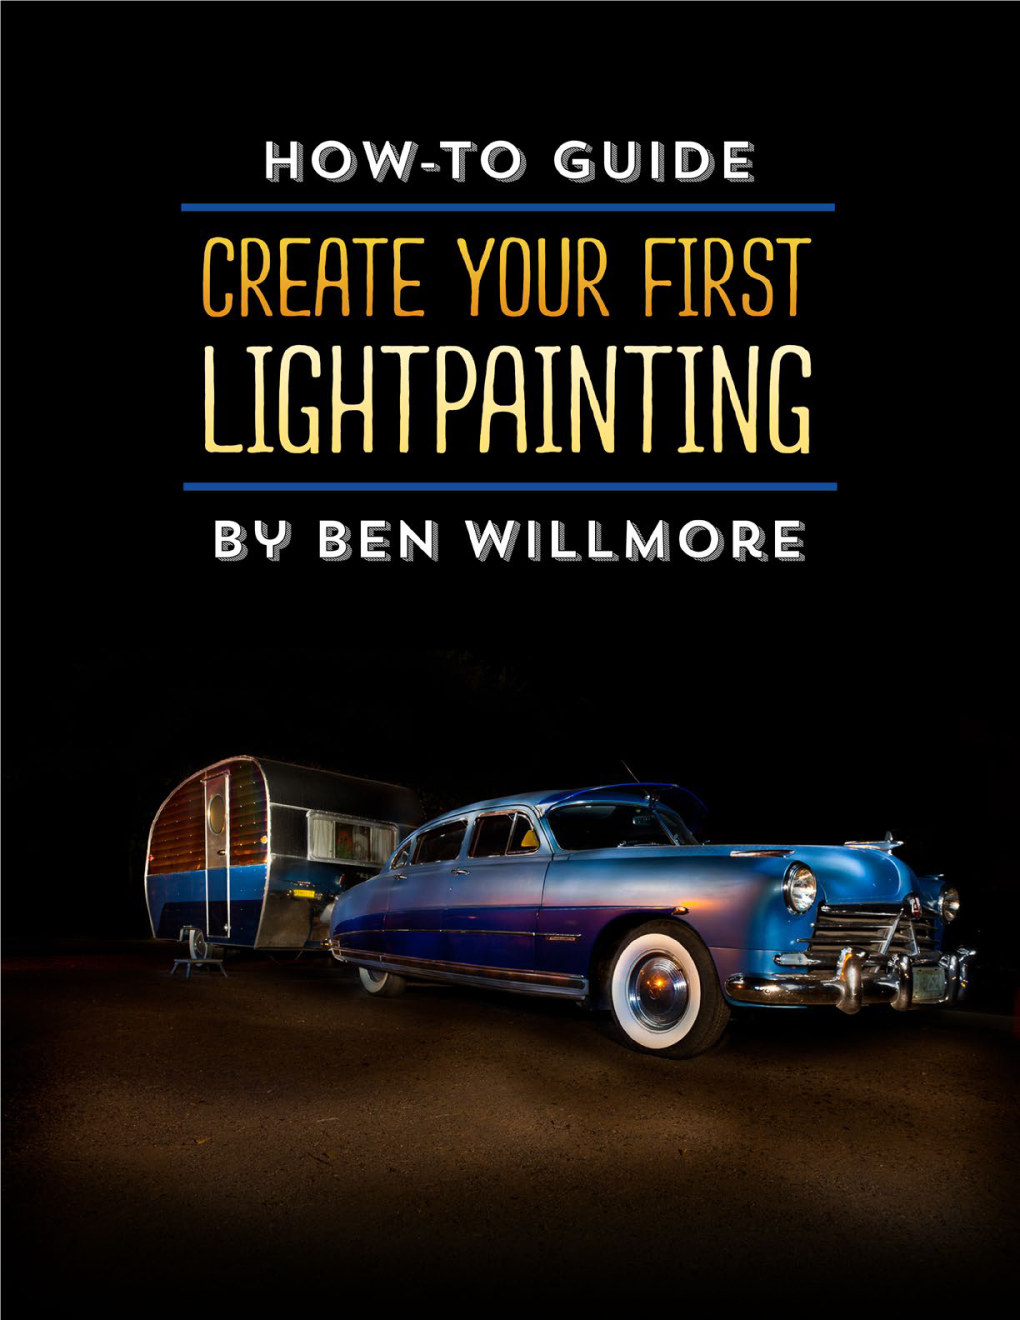 Create Your First Lightpainting | by Ben Willmore 1 Learning to Paint with Light